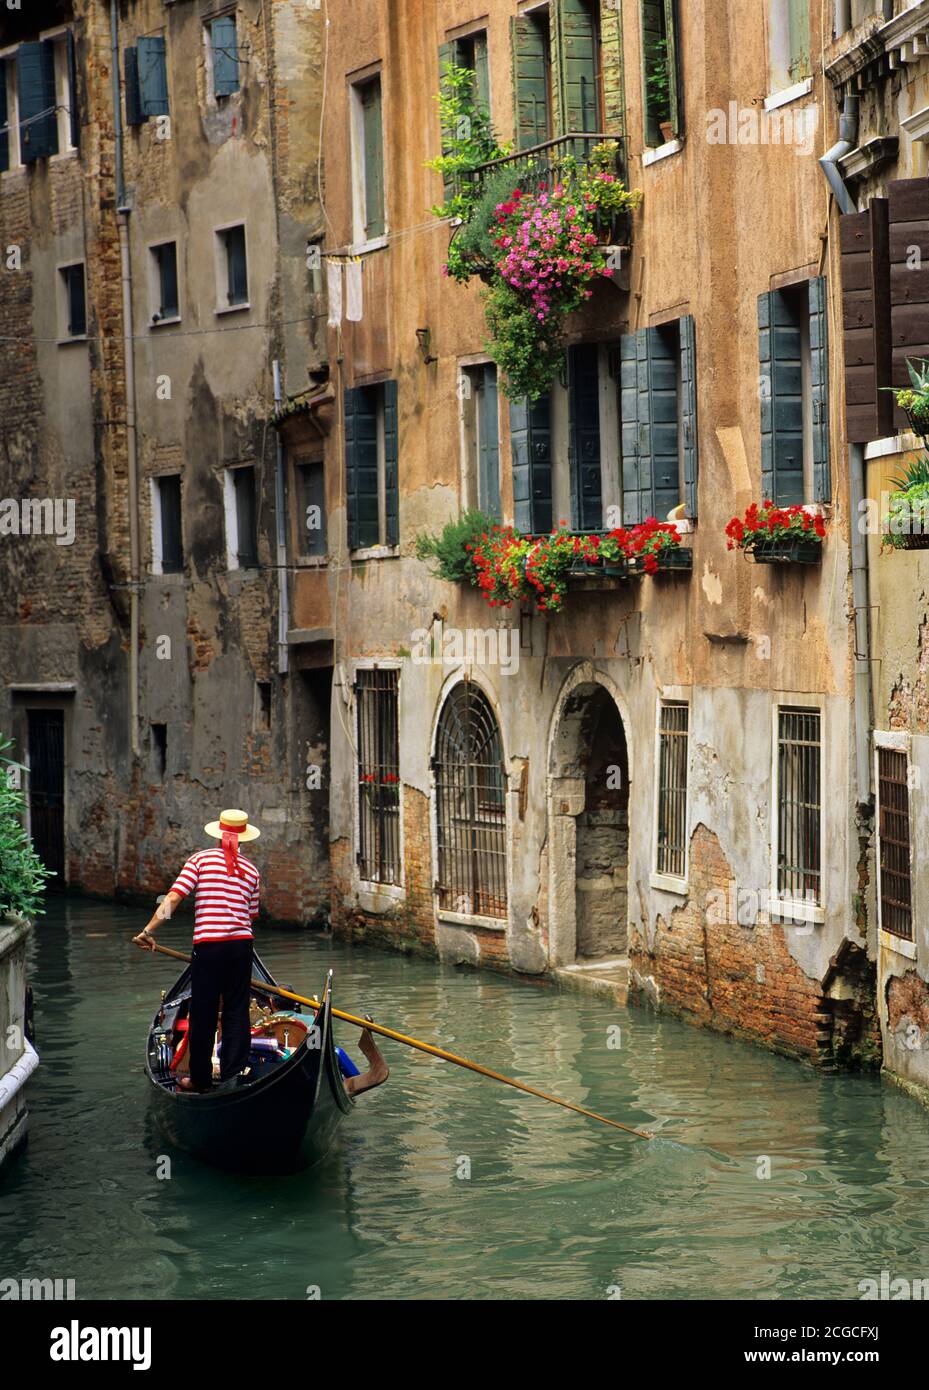 Gondola and Gondolier and flower-filled window boxes on side canal in Venice Stock Photo